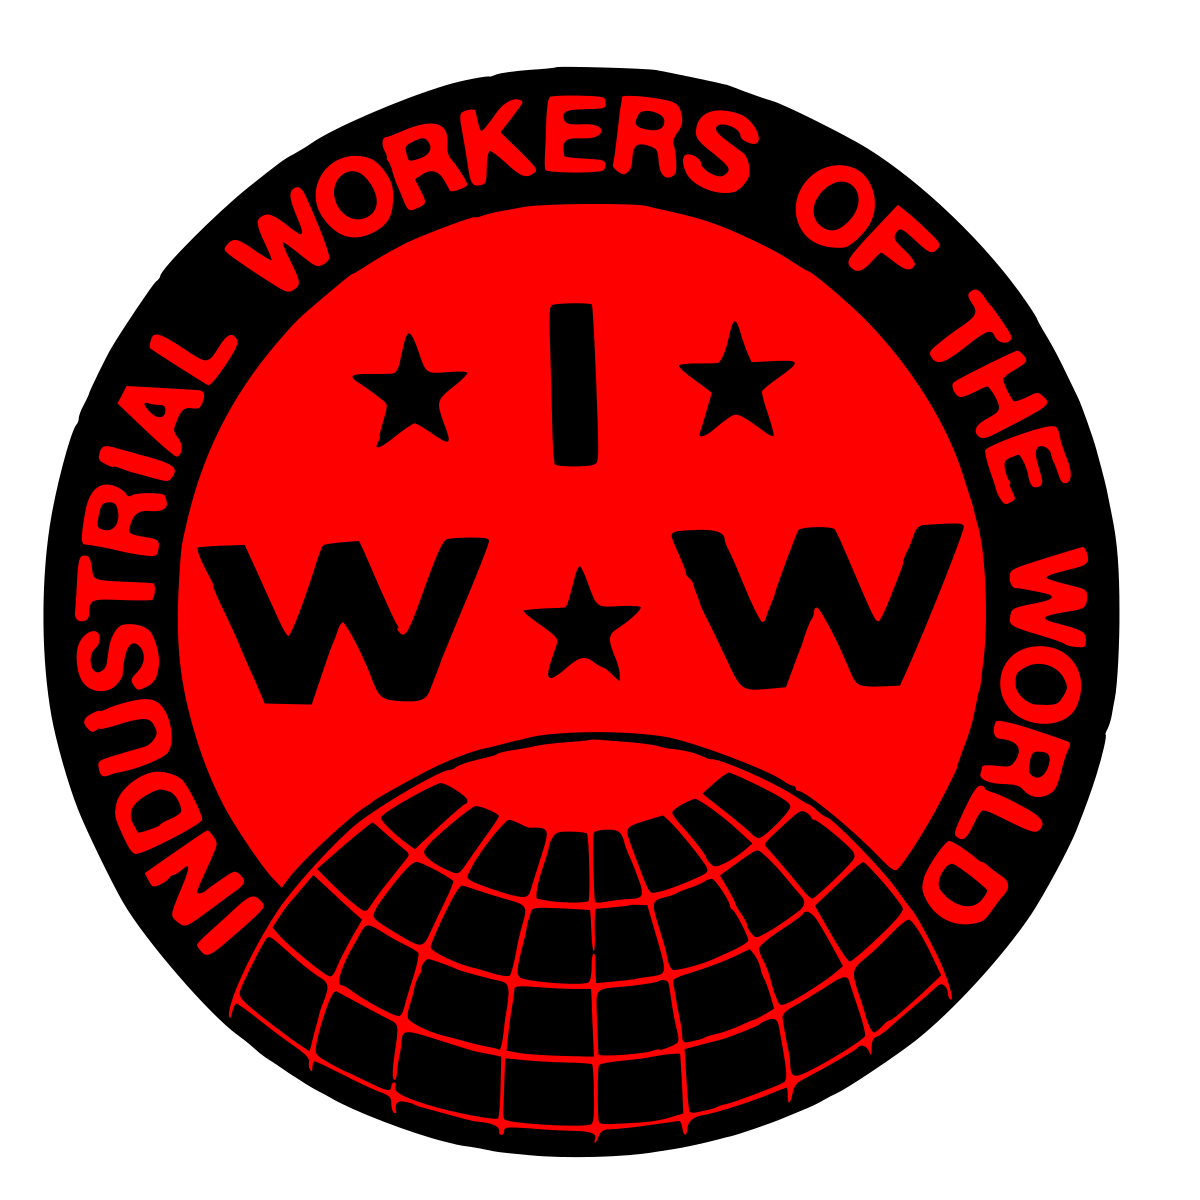 Industrial Black and Red Logo - Industrial Workers of the World